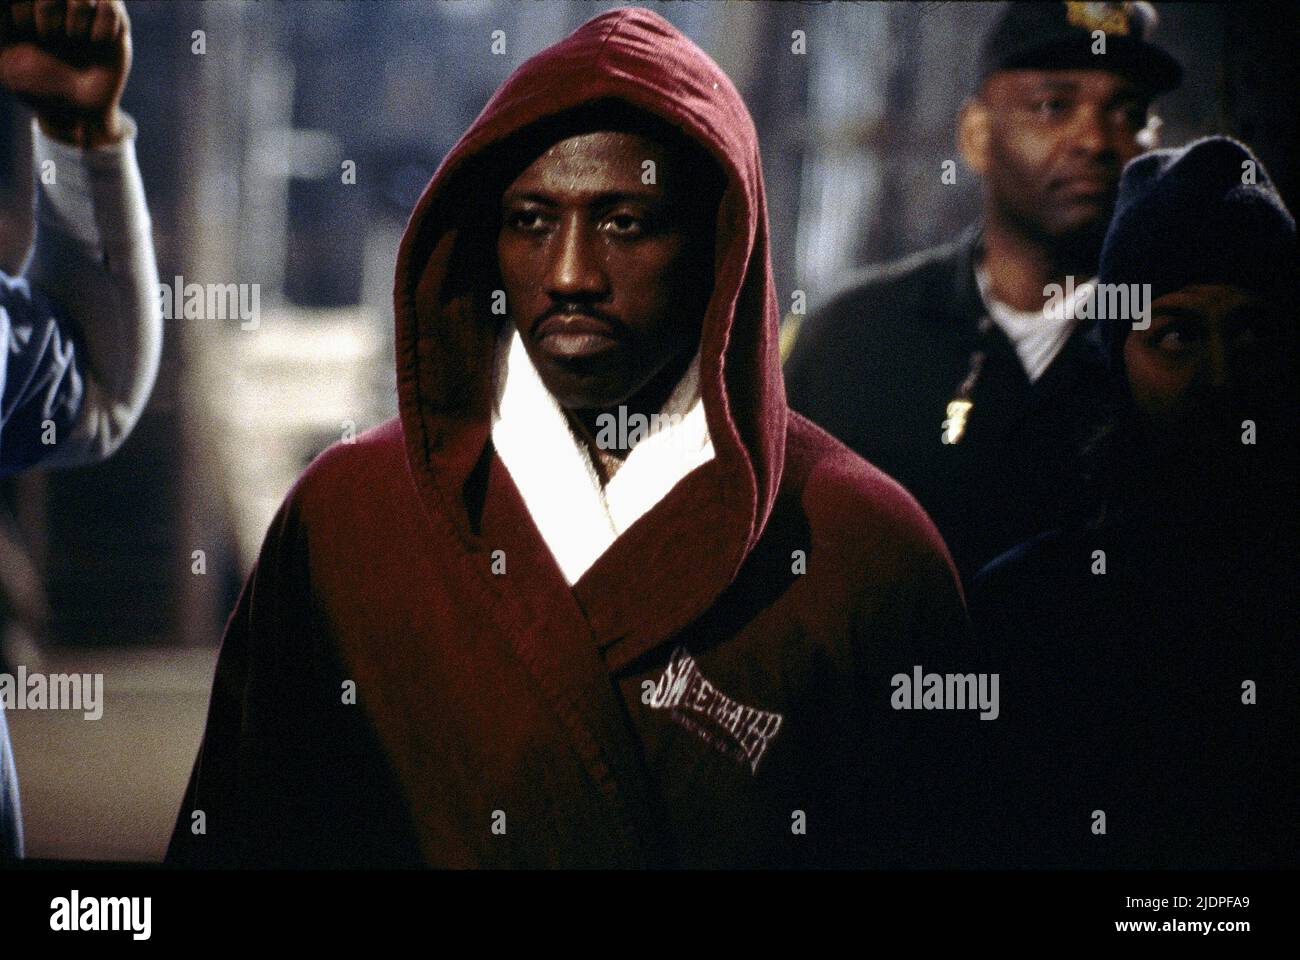 WESLEY SNIPES, UNDISPUTED, 2002 Stock Photo